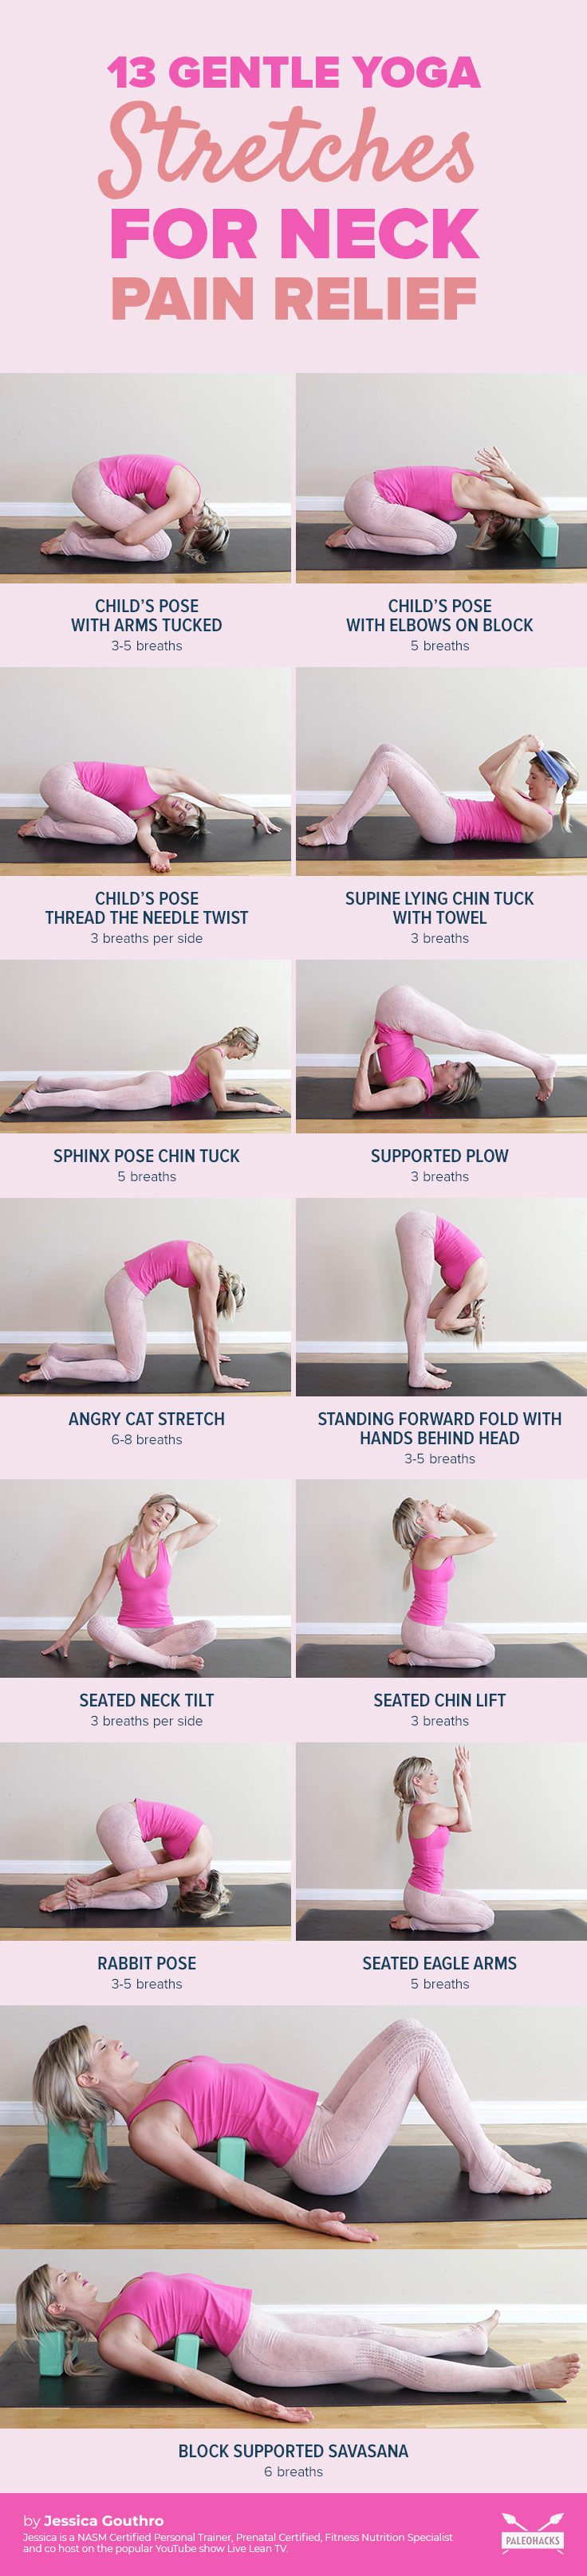 If you’ve got a stiff or sore neck, these yoga poses can help bring you some relief. All you need is a yoga mat, two yoga blocks and a towel to get started.